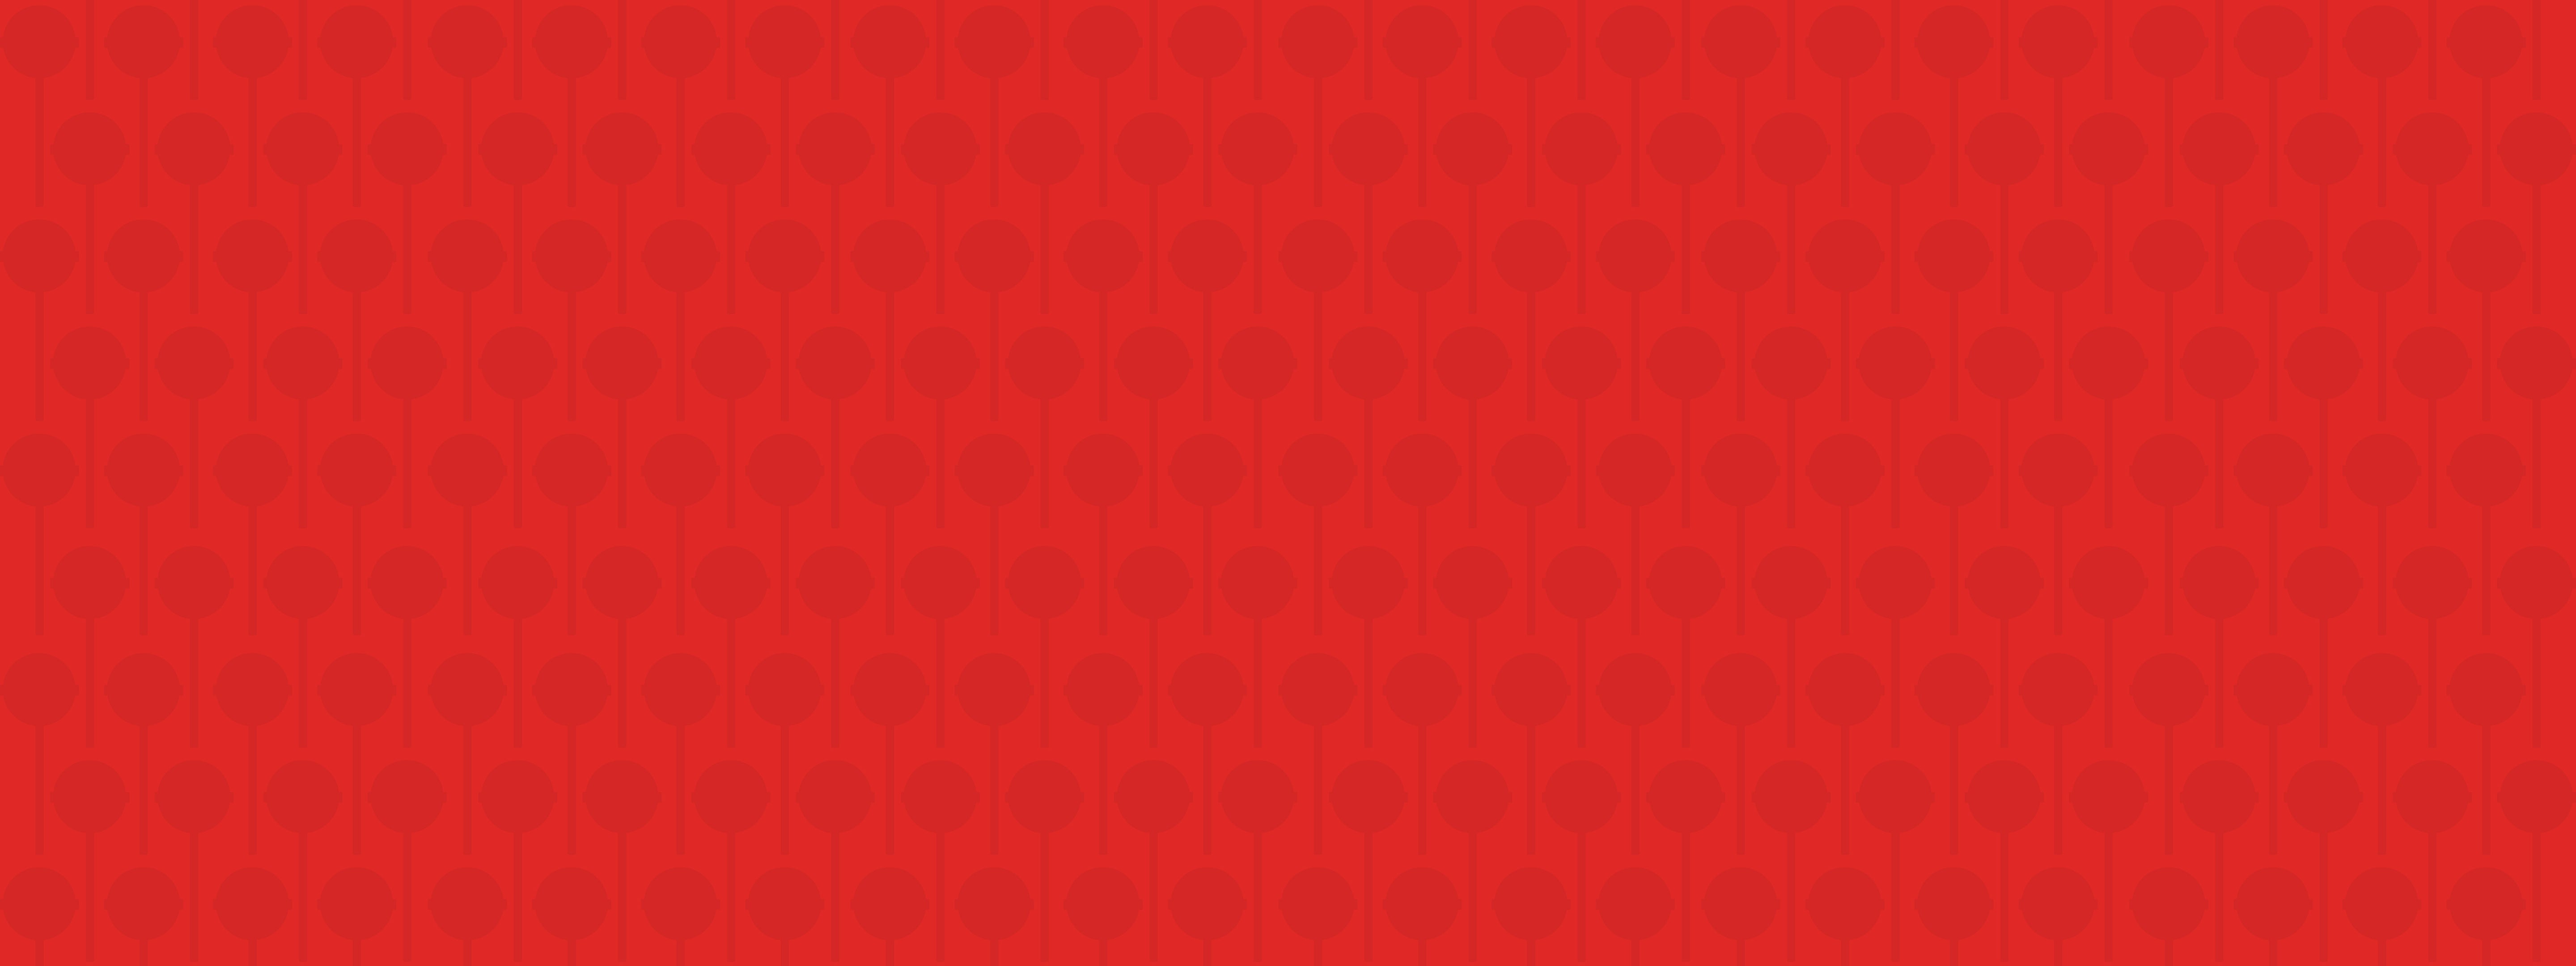 Patterned wallpaper with red on red lollipops